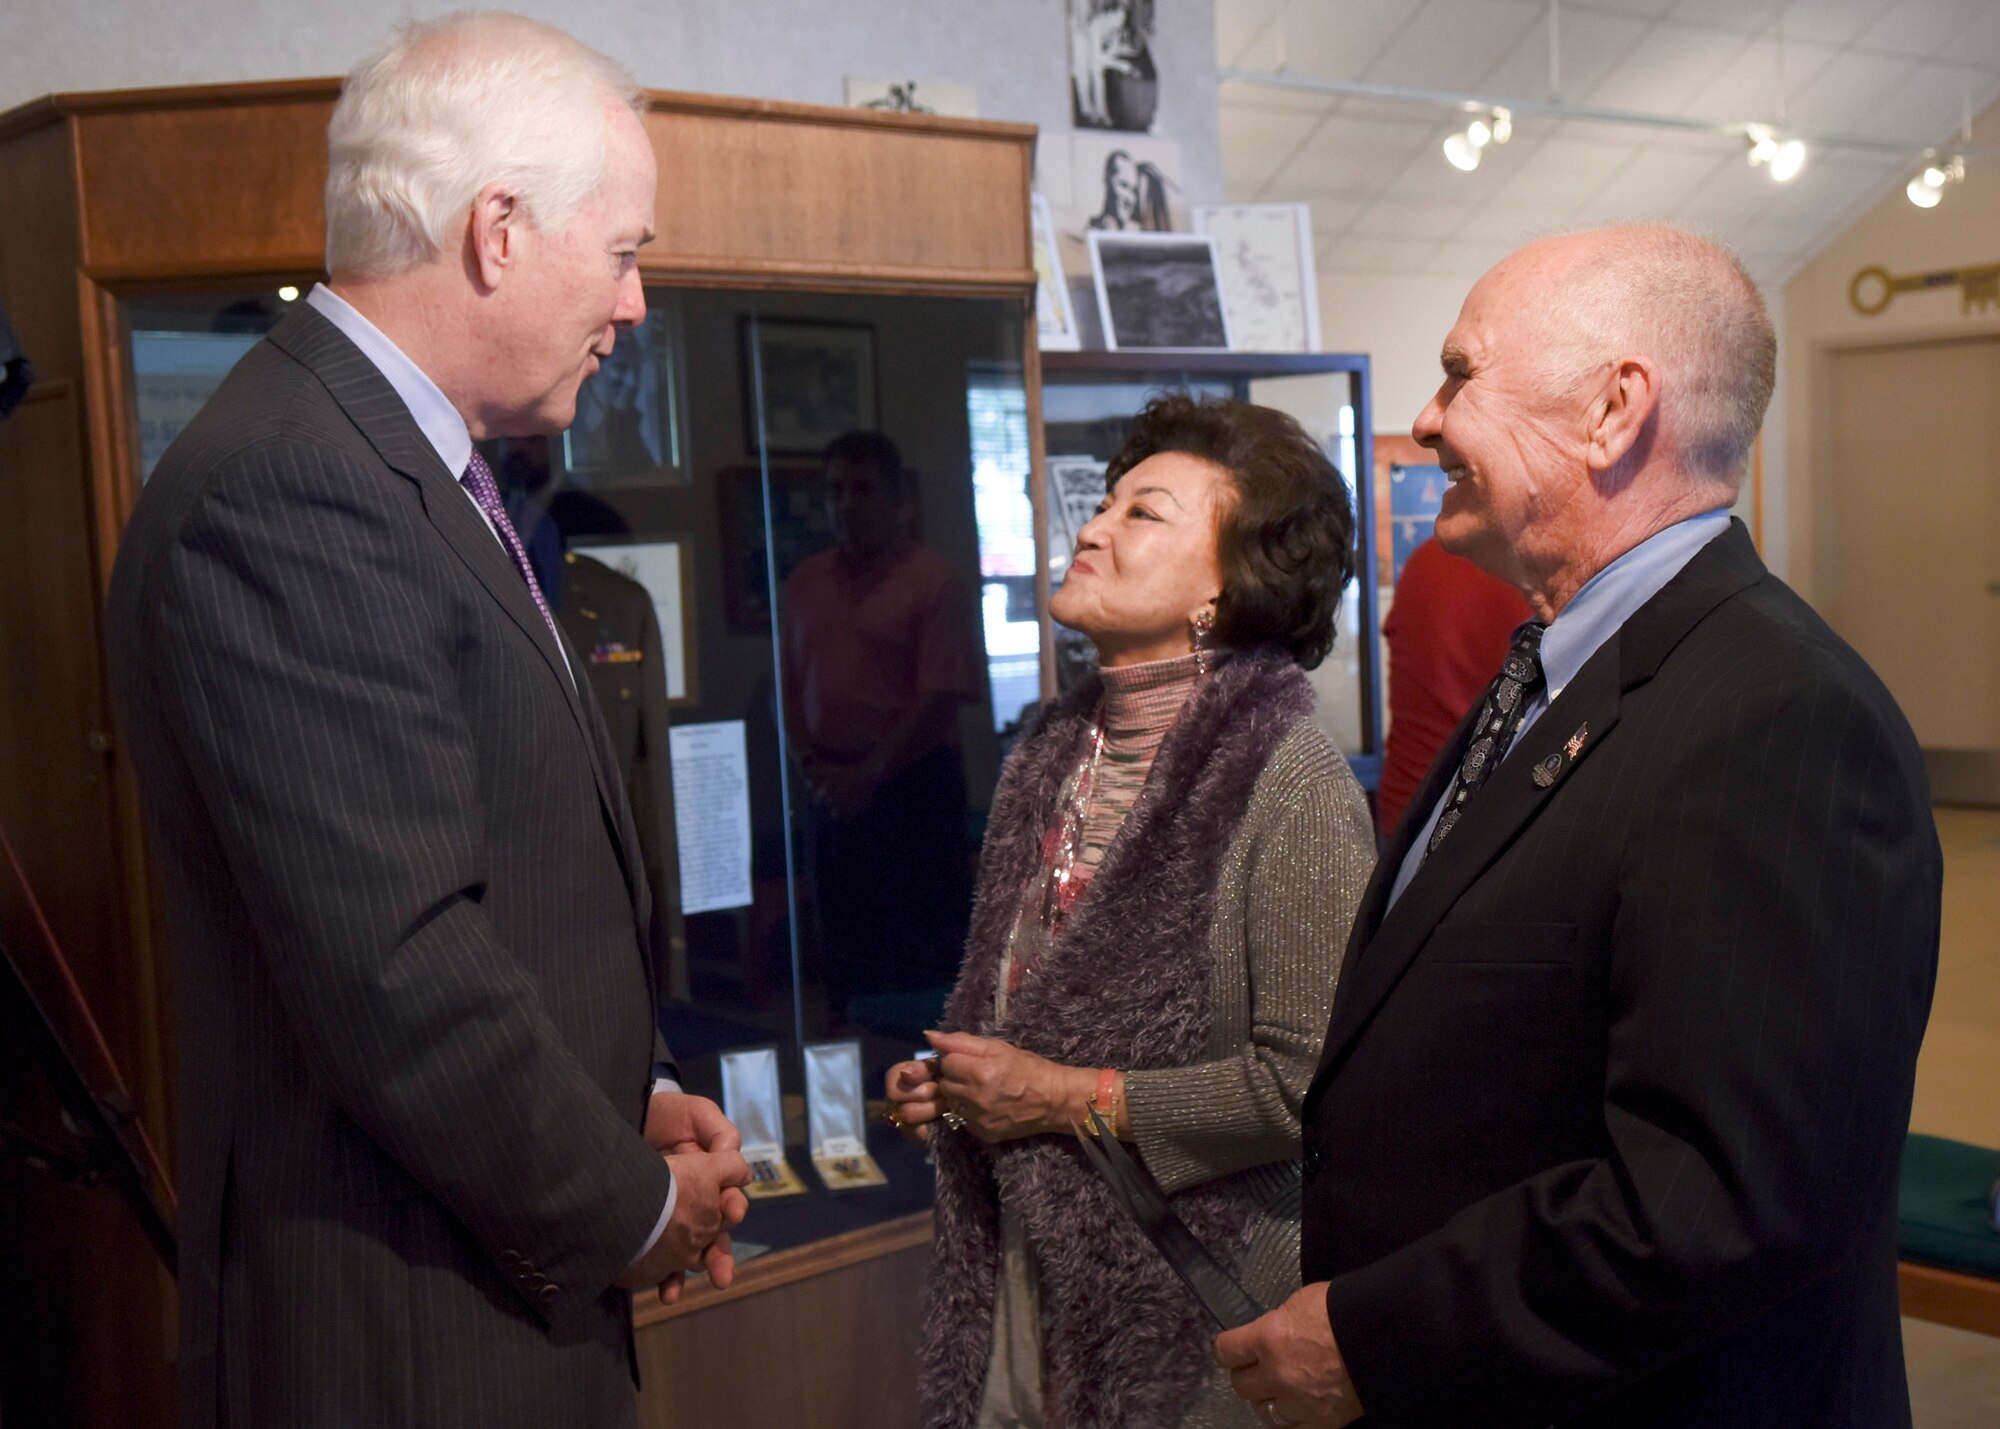 U.S. Sen. John Cornyn, R-TX, shares a moment with Dr. Stanley Scott Jr., son of U.S. Army Air Corps pilot Capt. Stanley Scott Sr., and his wife, Diana Scott, at the Dyess Museum in Abilene, Texas, April 18, 2017. Cornyn presented the POW medal to the Scott family on behalf of Scott Sr. (U.S. Air Force photo by Senior Airman Kedesha Pennant)
 
